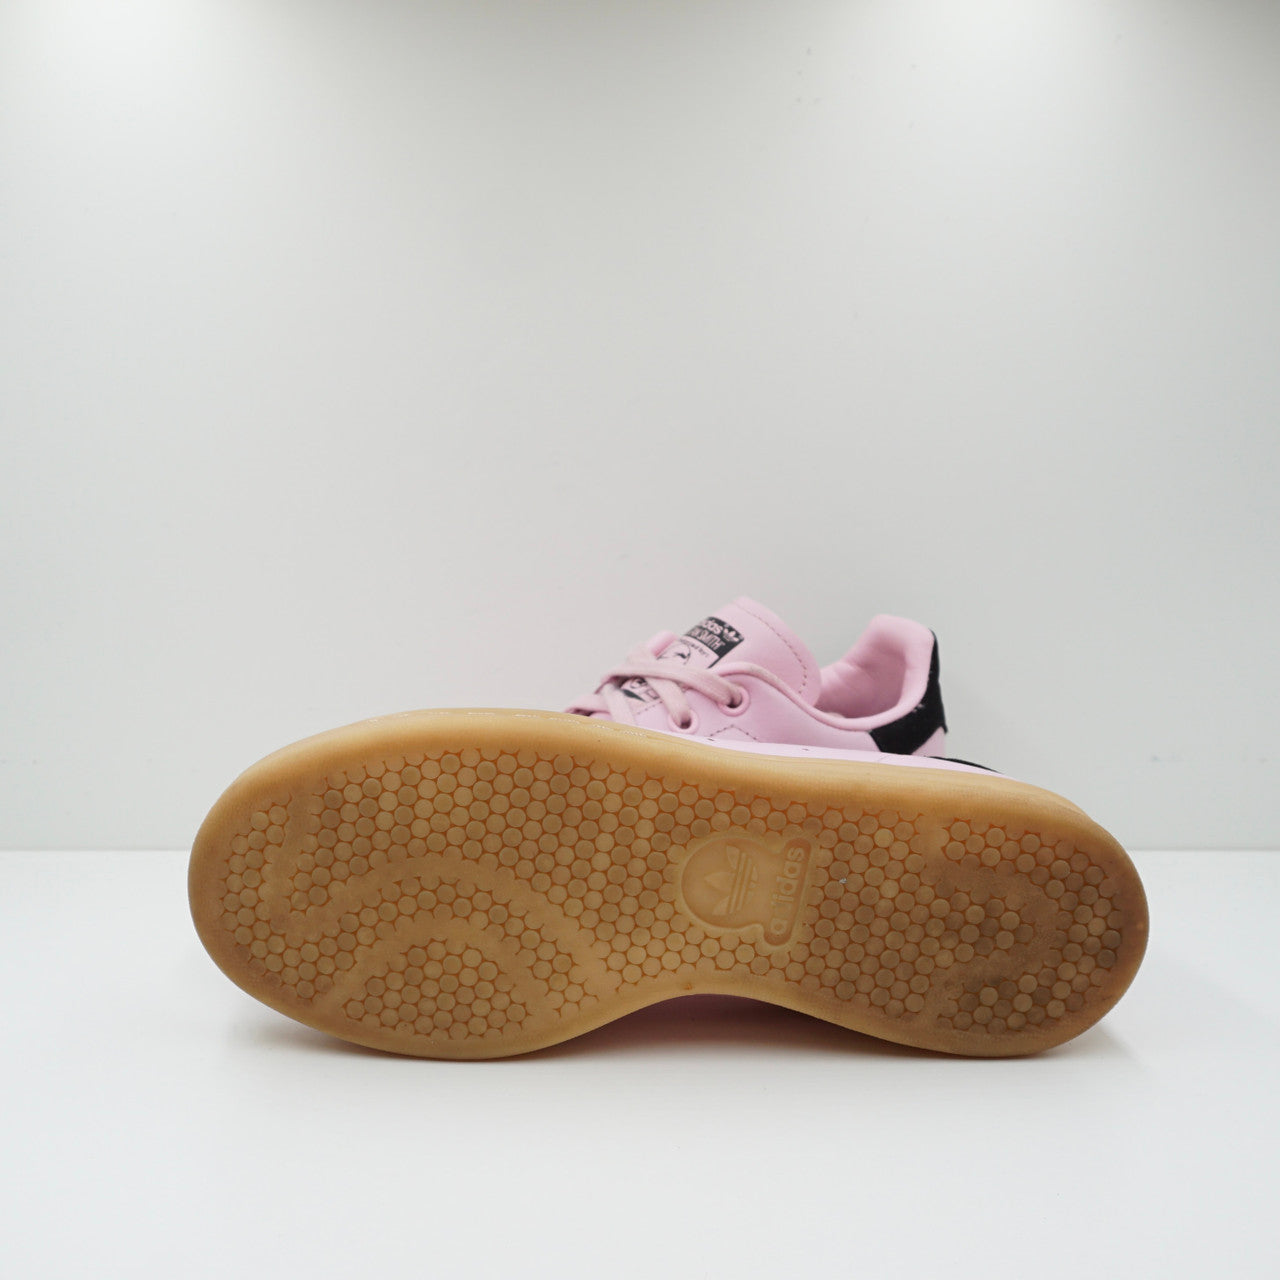 Adidas Stan Smith Cotton Candy Pink (W)